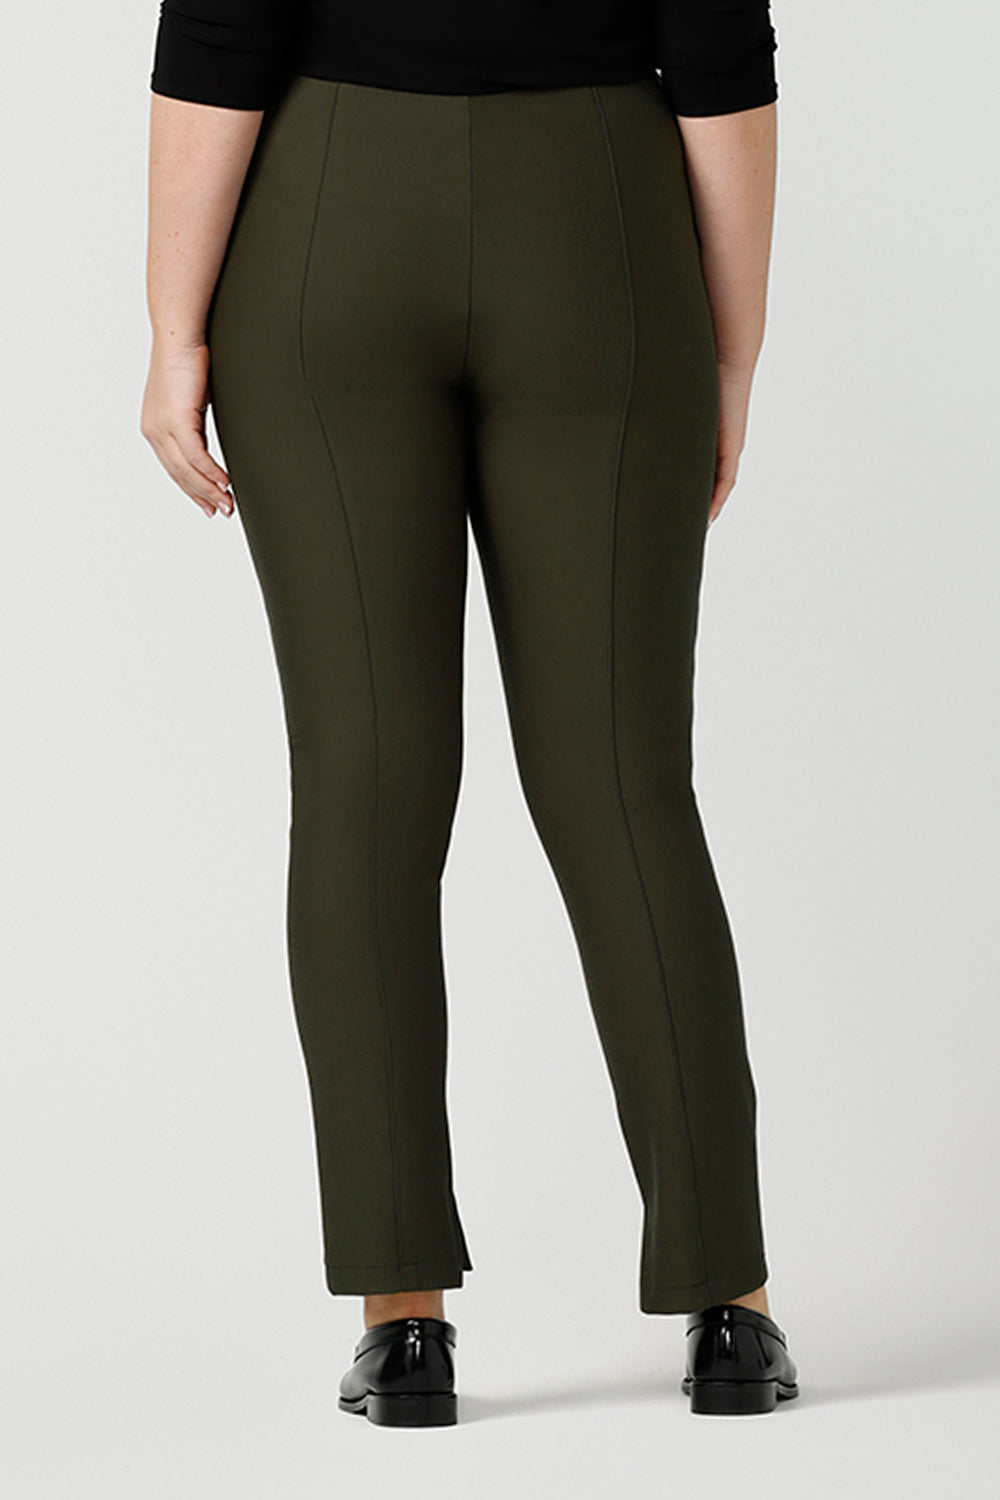 Back view of good smart-casual, professional pants for curvy women, these olive green slim leg pants are shown on a size 12, curvy woman. Made in Australia by online ladies clothing brand, Leina & Fleur, shop these ethical, comfortable trousers in petite to plus sizes.